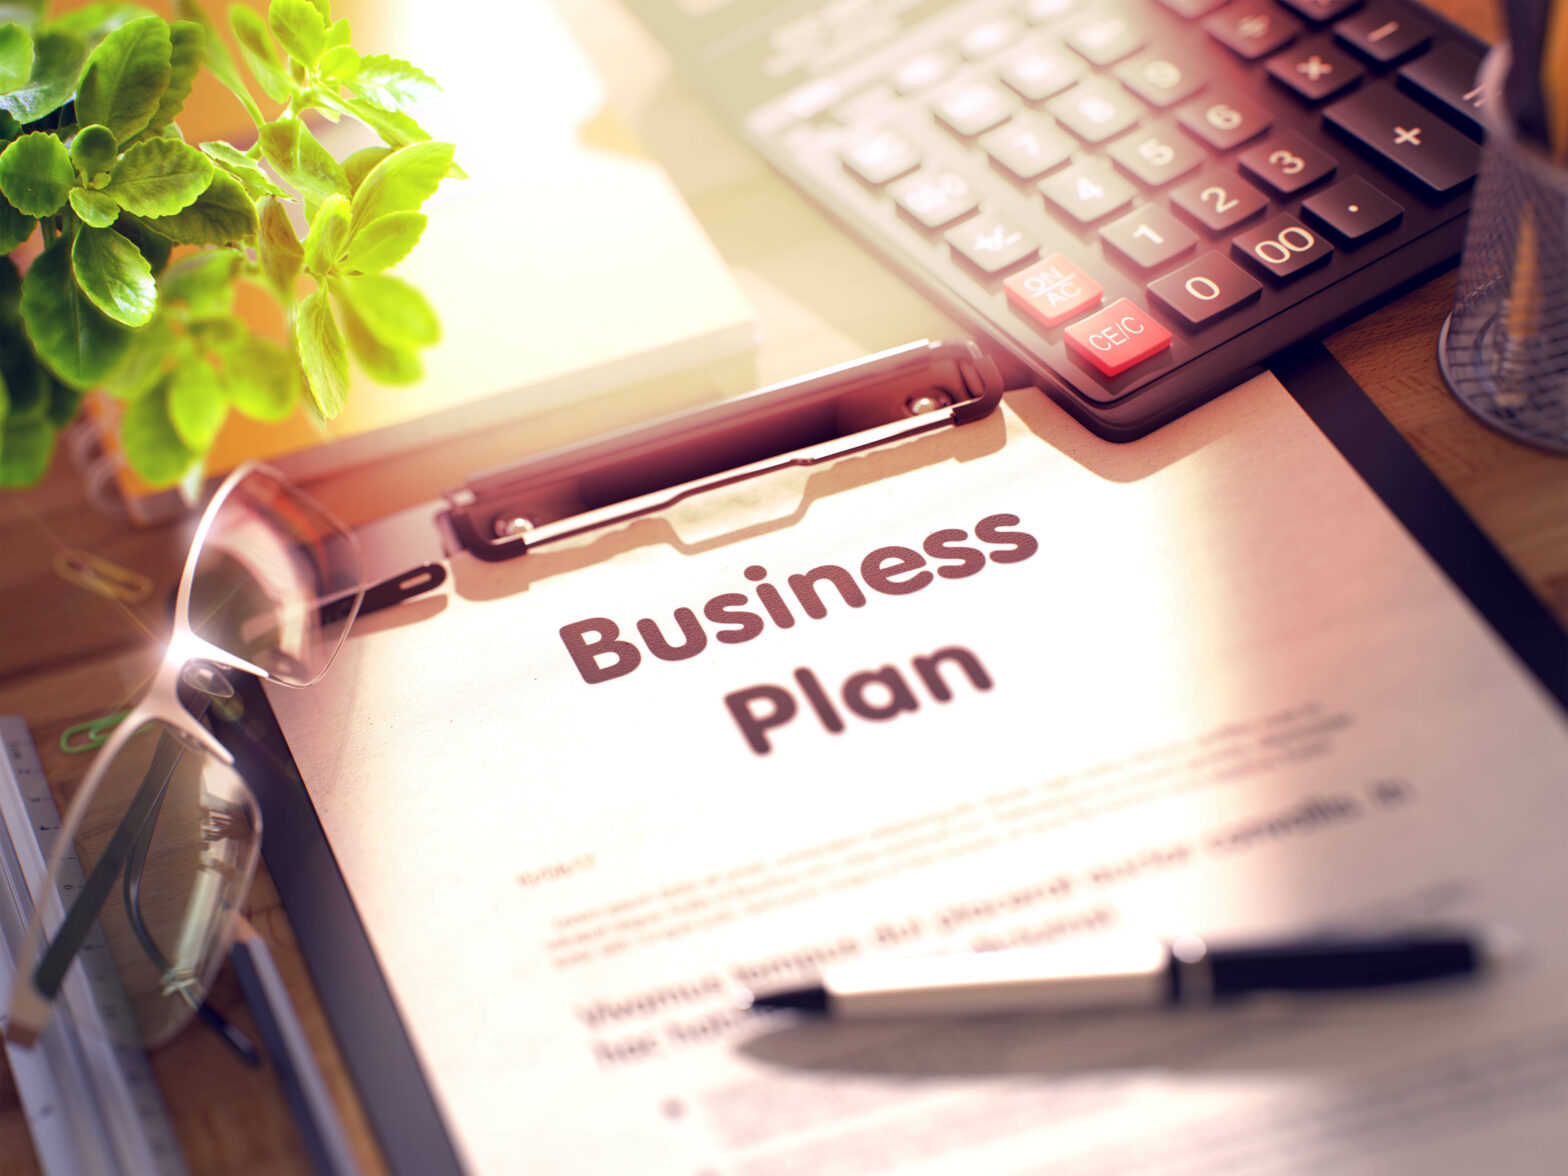 Example business plans - Small Business UK